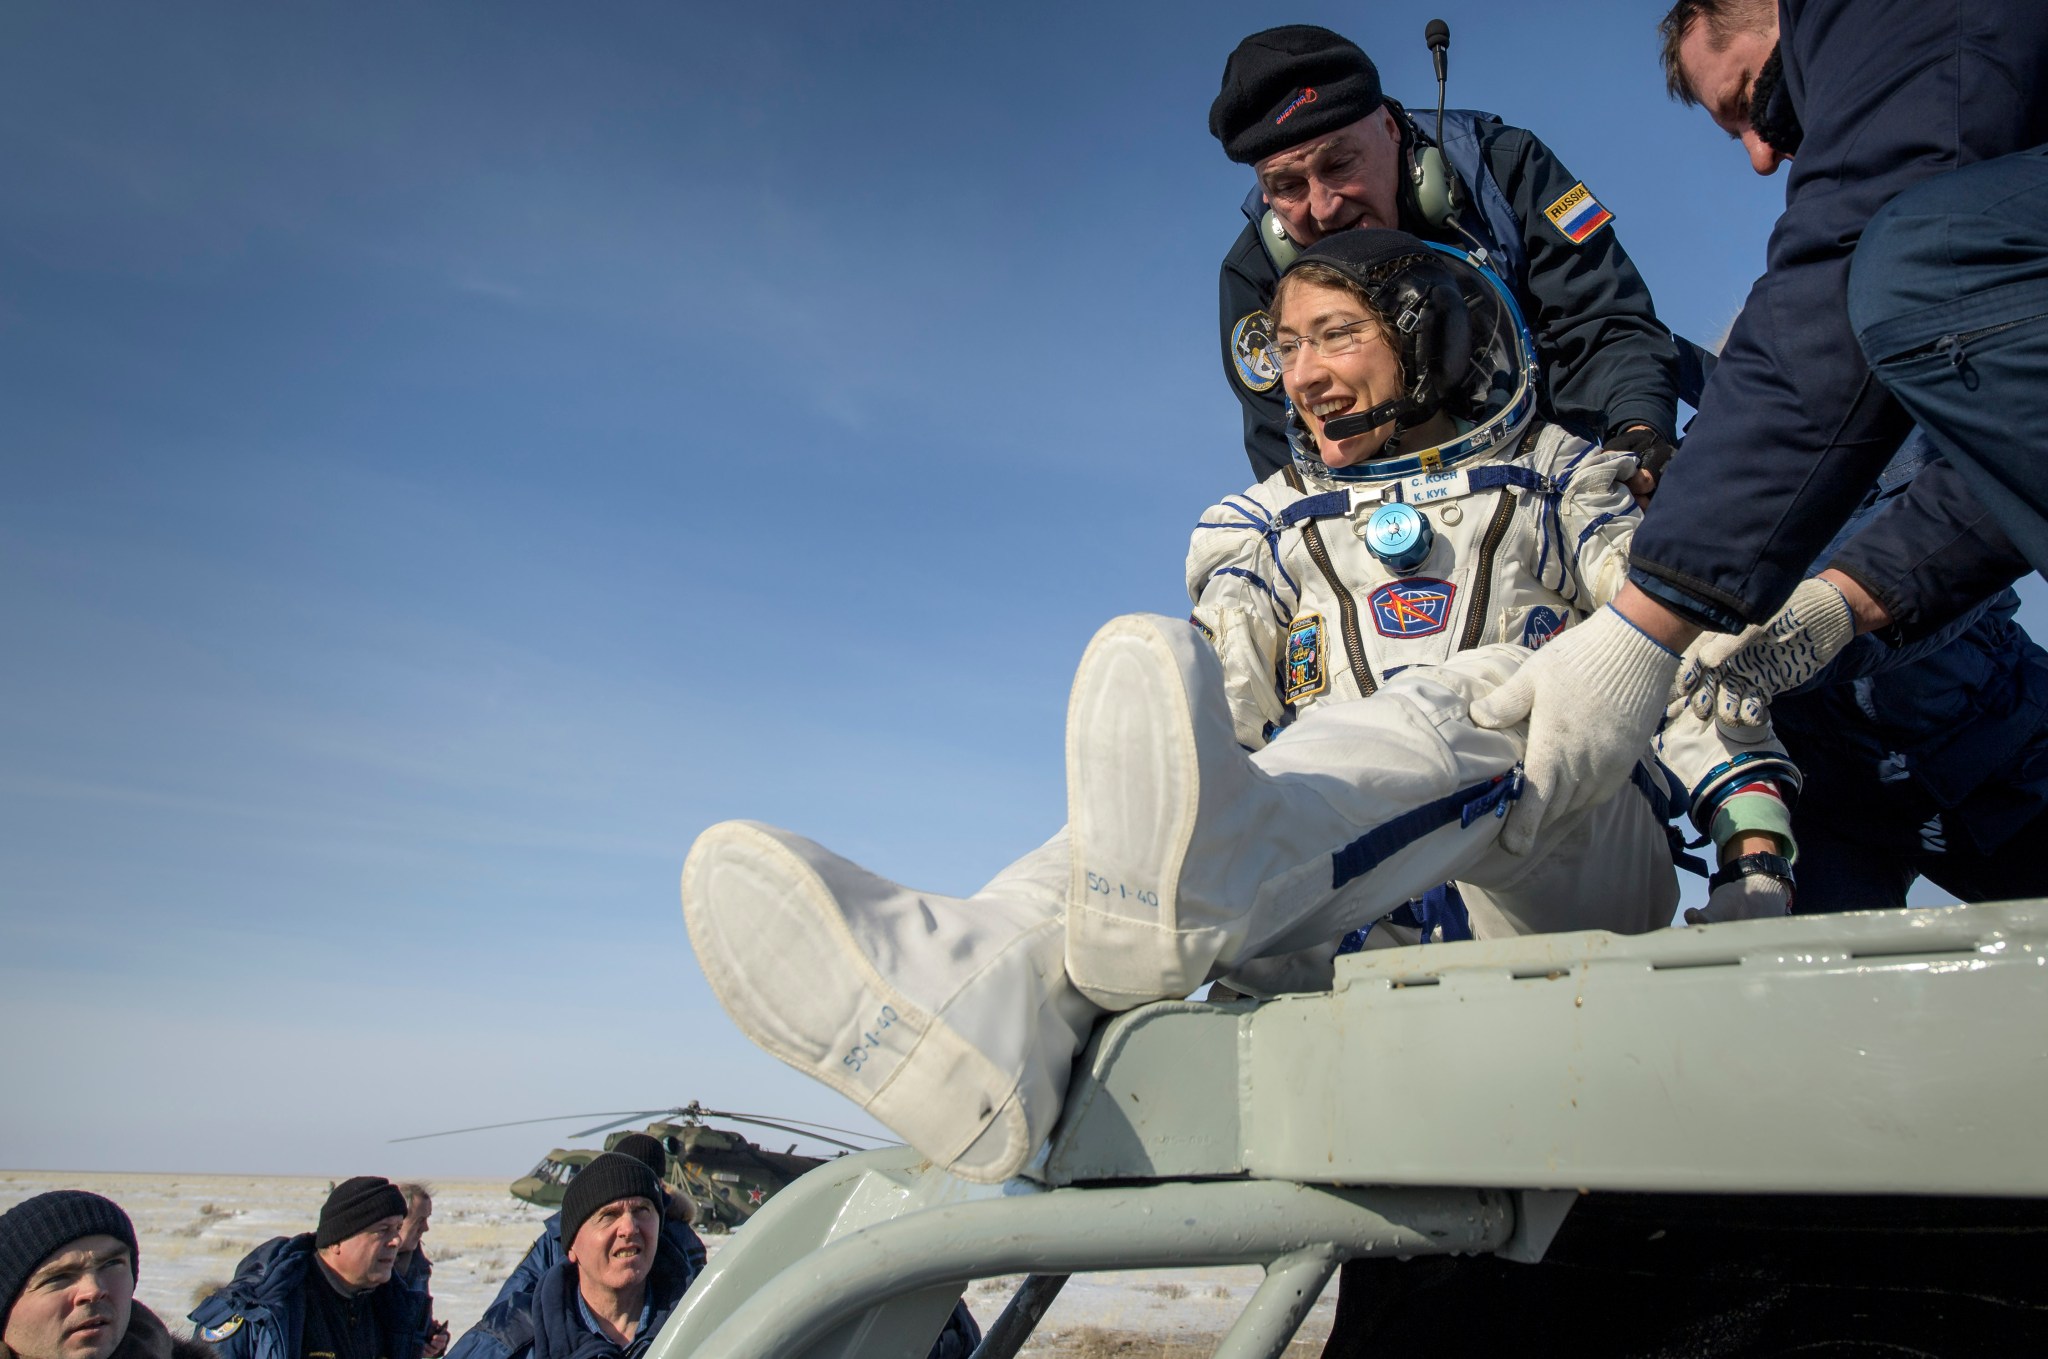 NASA astronaut Christina Koch is helped out of the Soyuz capsule after returning from the space station on Feb. 6, 2020.